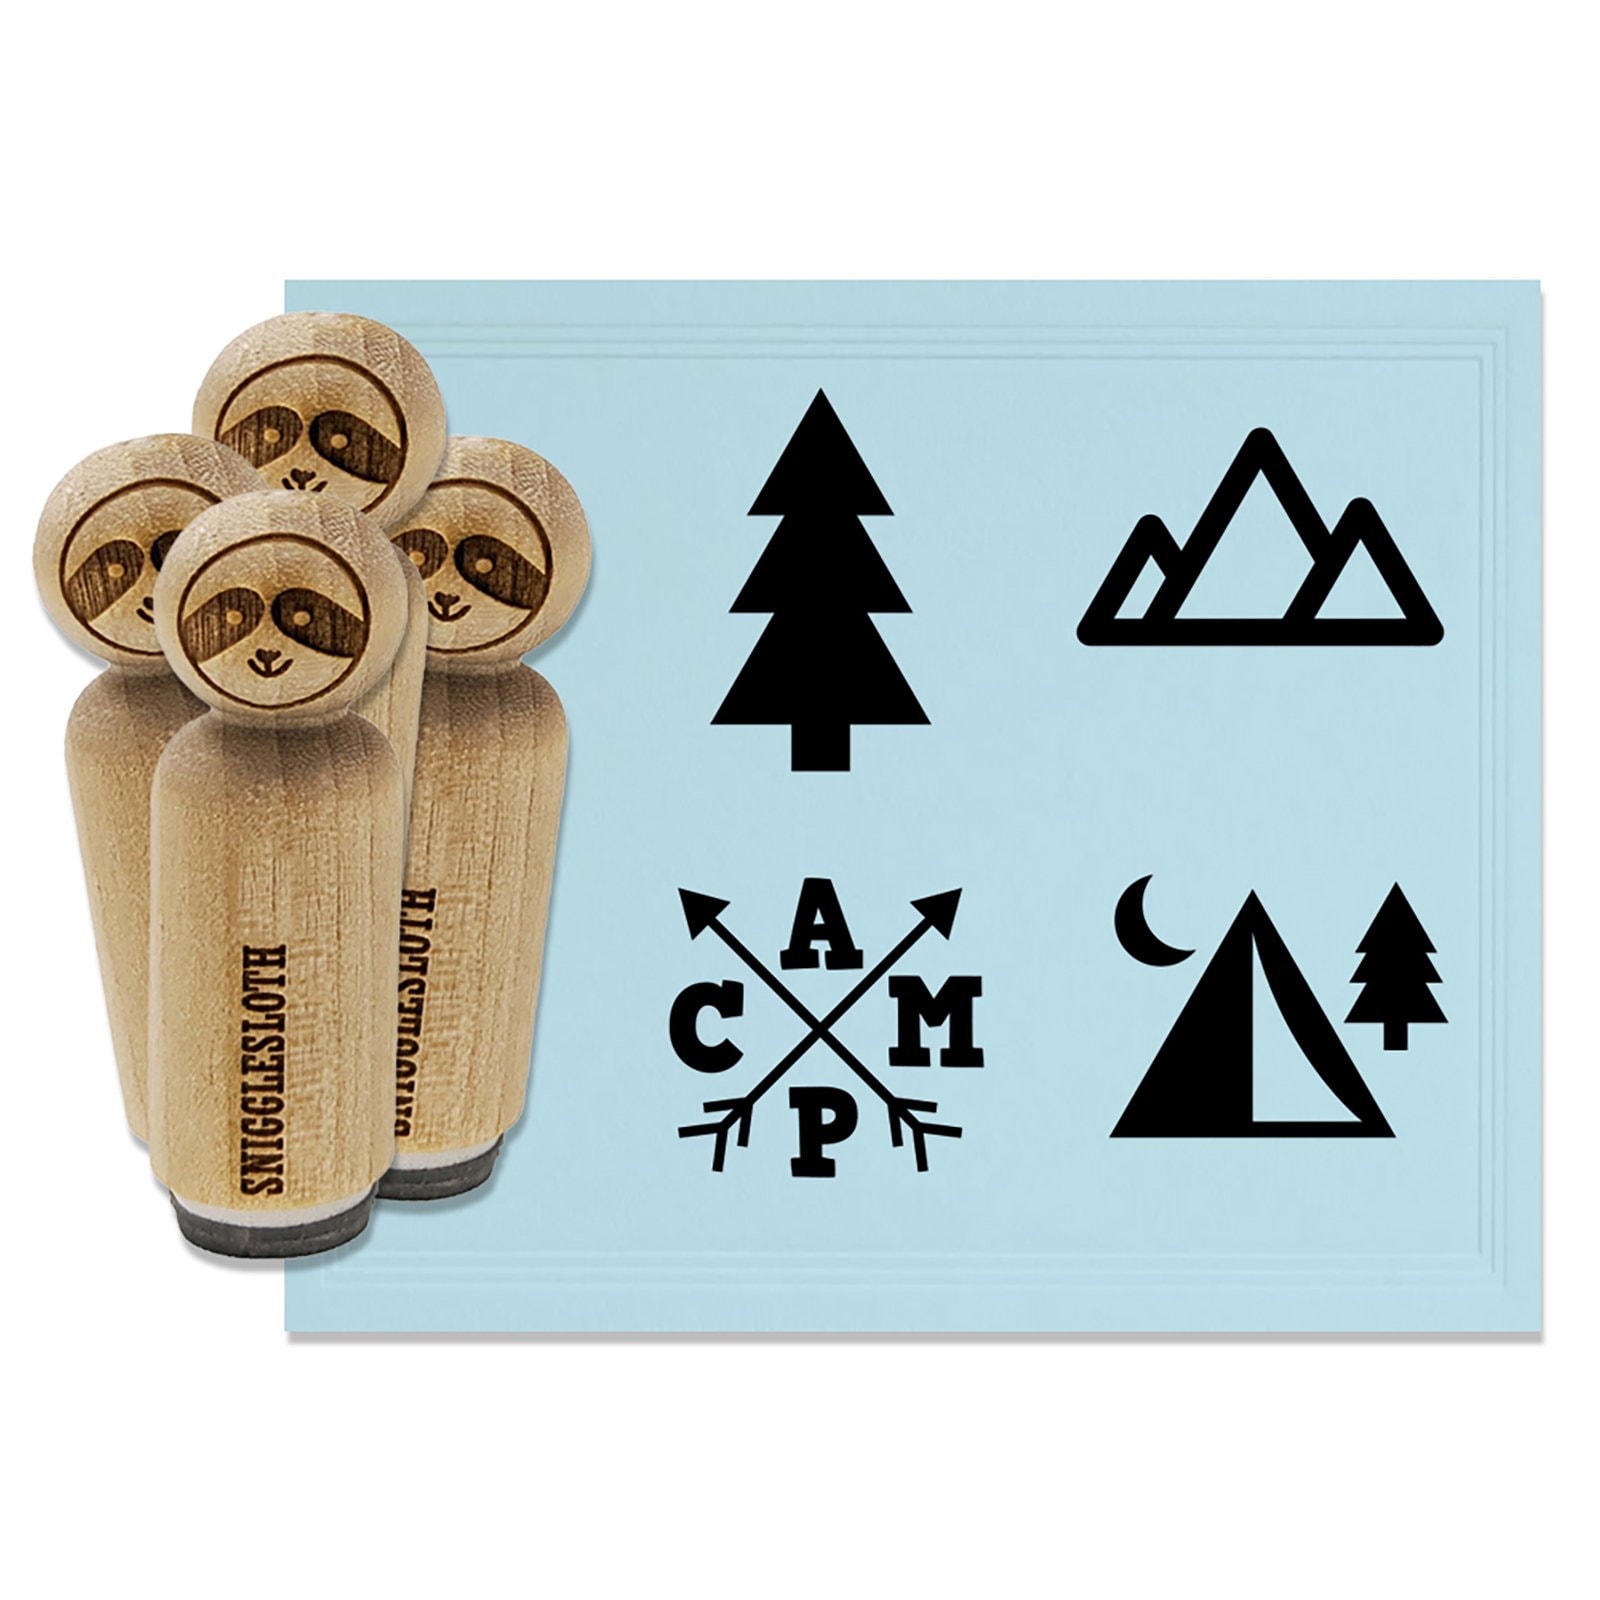 Camping Rubber Stamp Sheet 8 1/2" x 11" Explore Tent #25 Pine Trees Mountains 